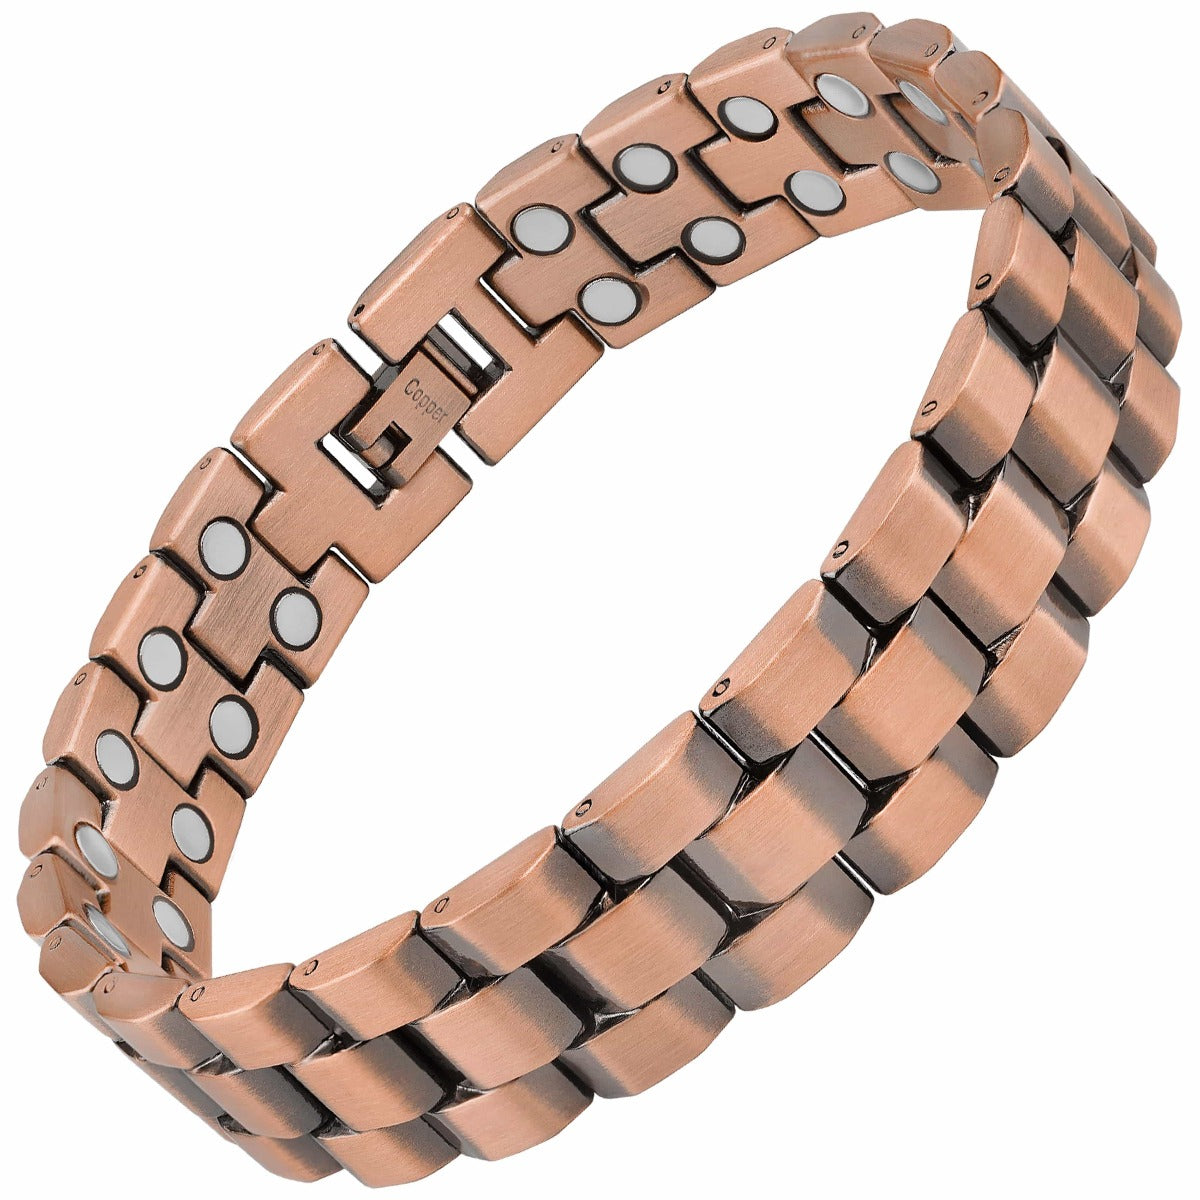 Healing Copper Magnetic Therapy Bracelet Arthritis | Copper Energy Healing  Bracelet - Bracelets - Aliexpress